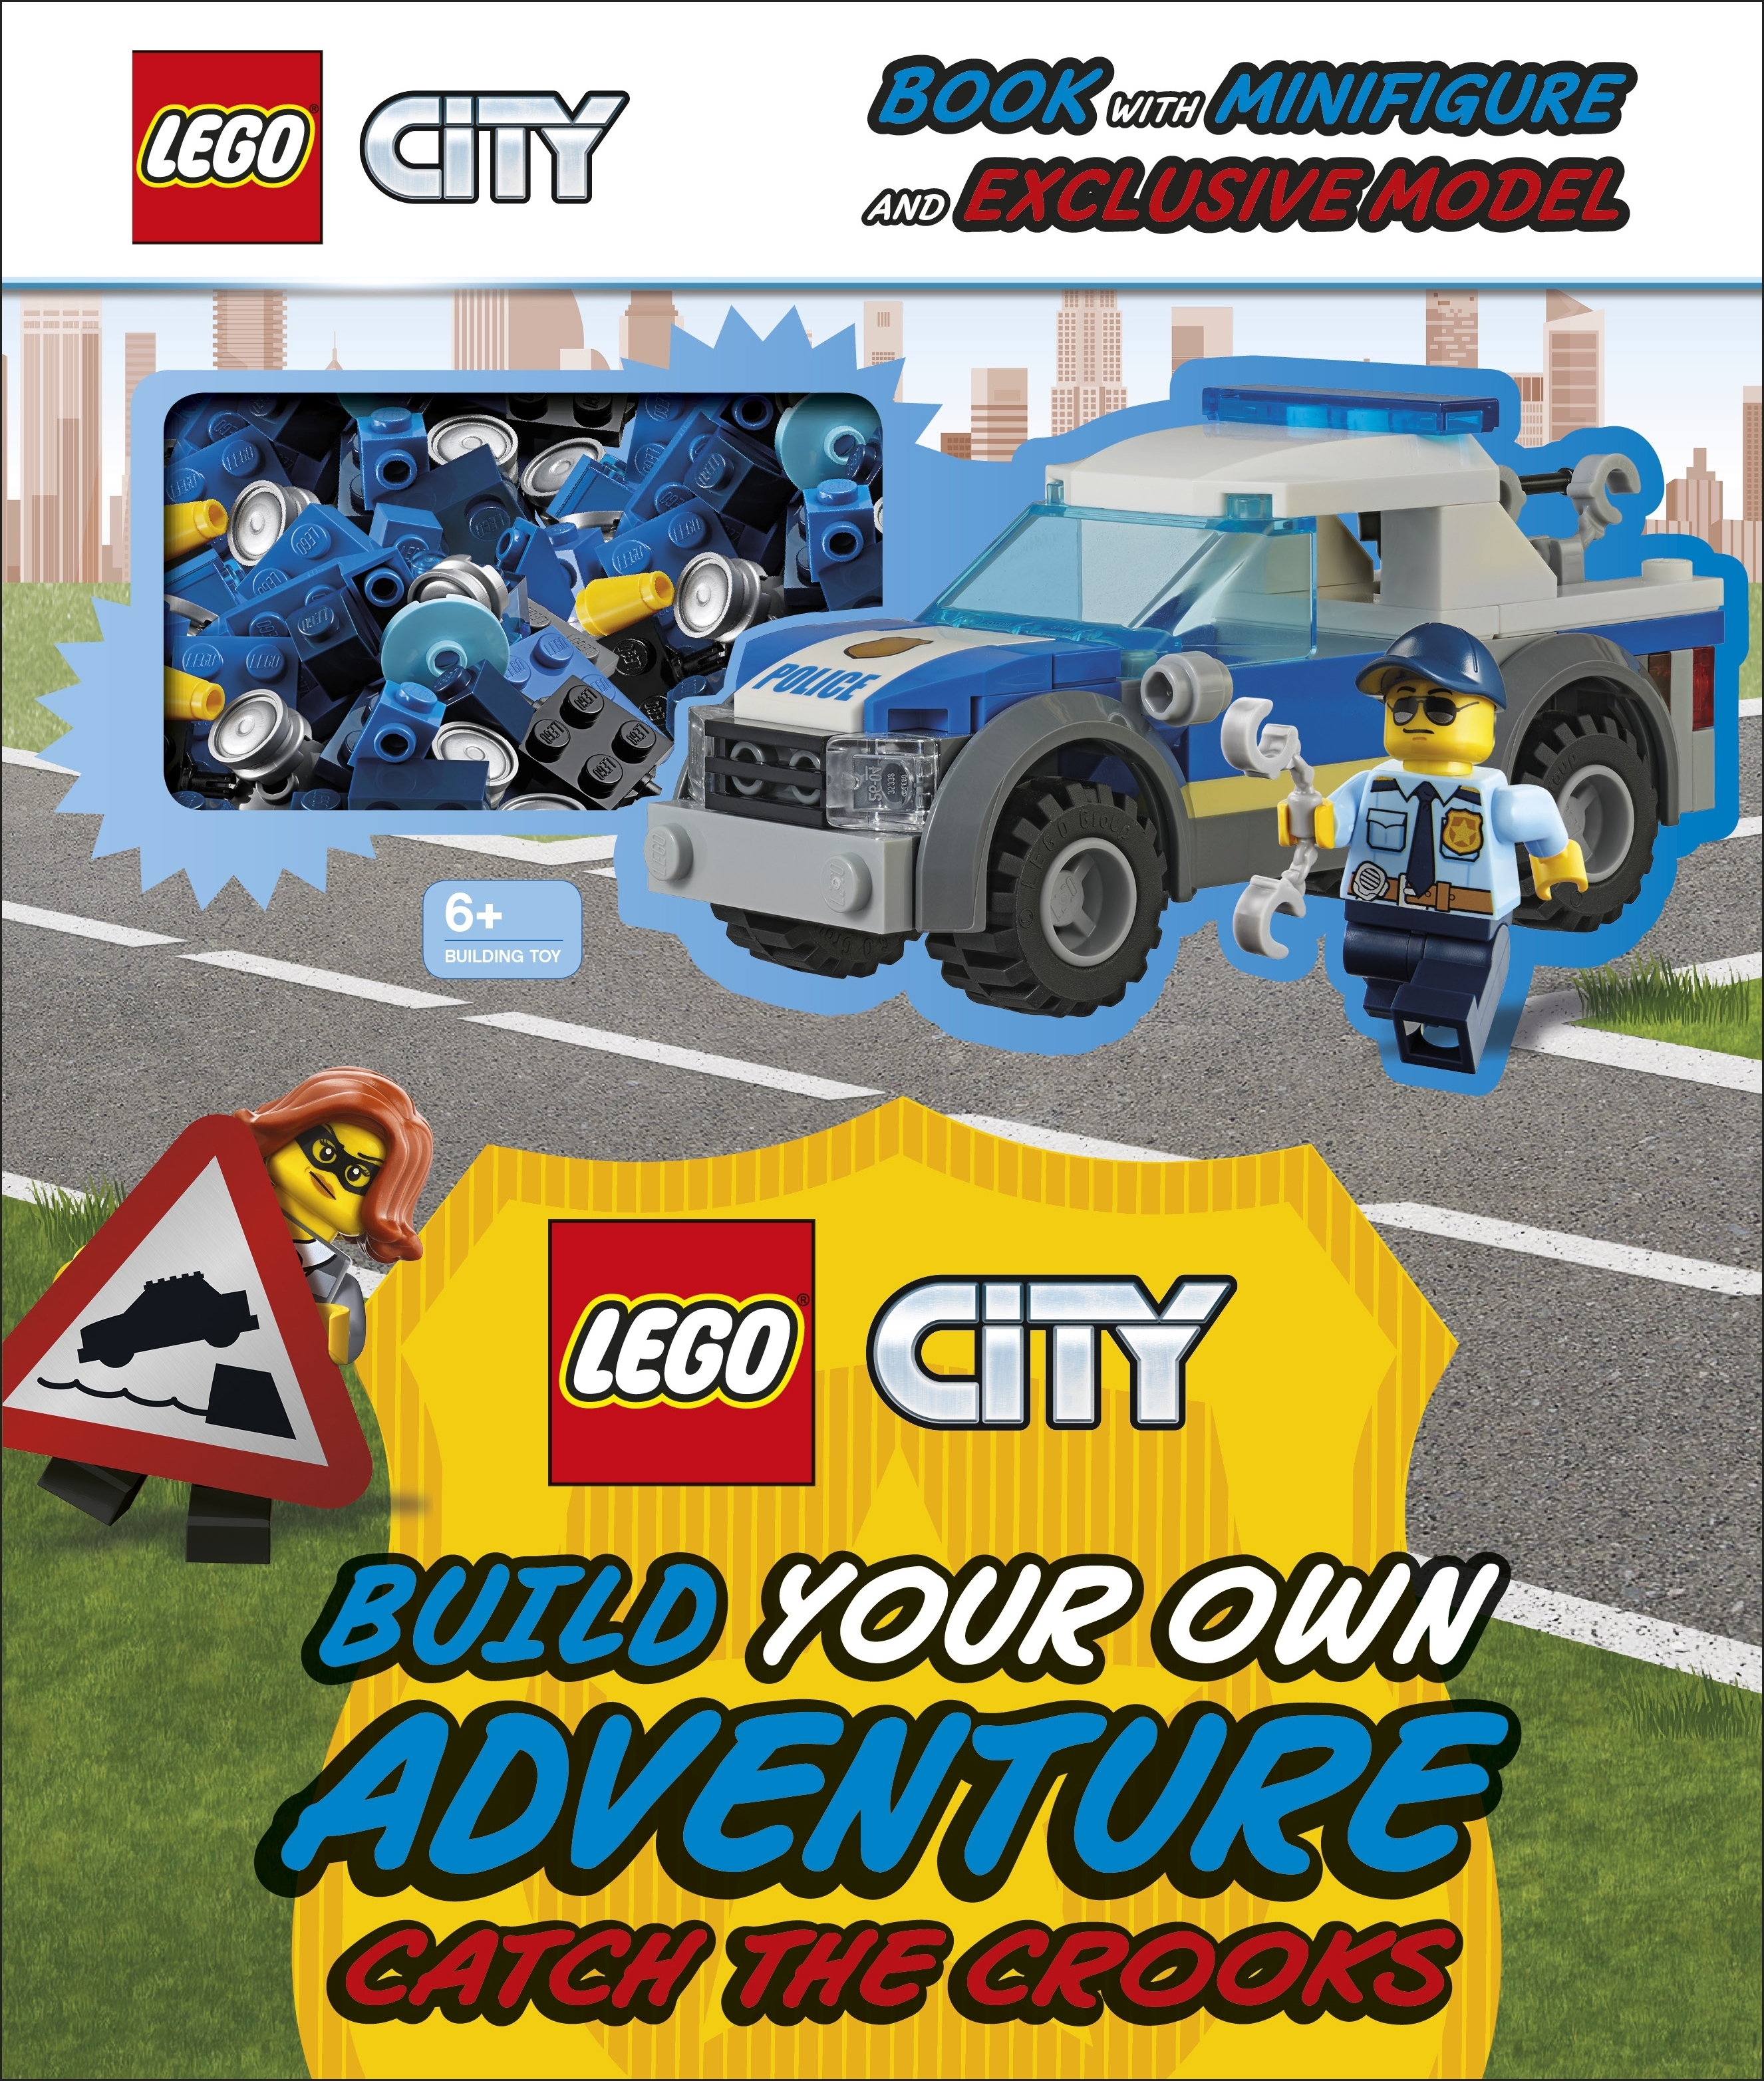 LEGO CITY BUILD YOUR OWN ADVENTURE CATCH THE CROOKS : WITH MINIFIGURE AND EXCLUSIVE MODEL HC